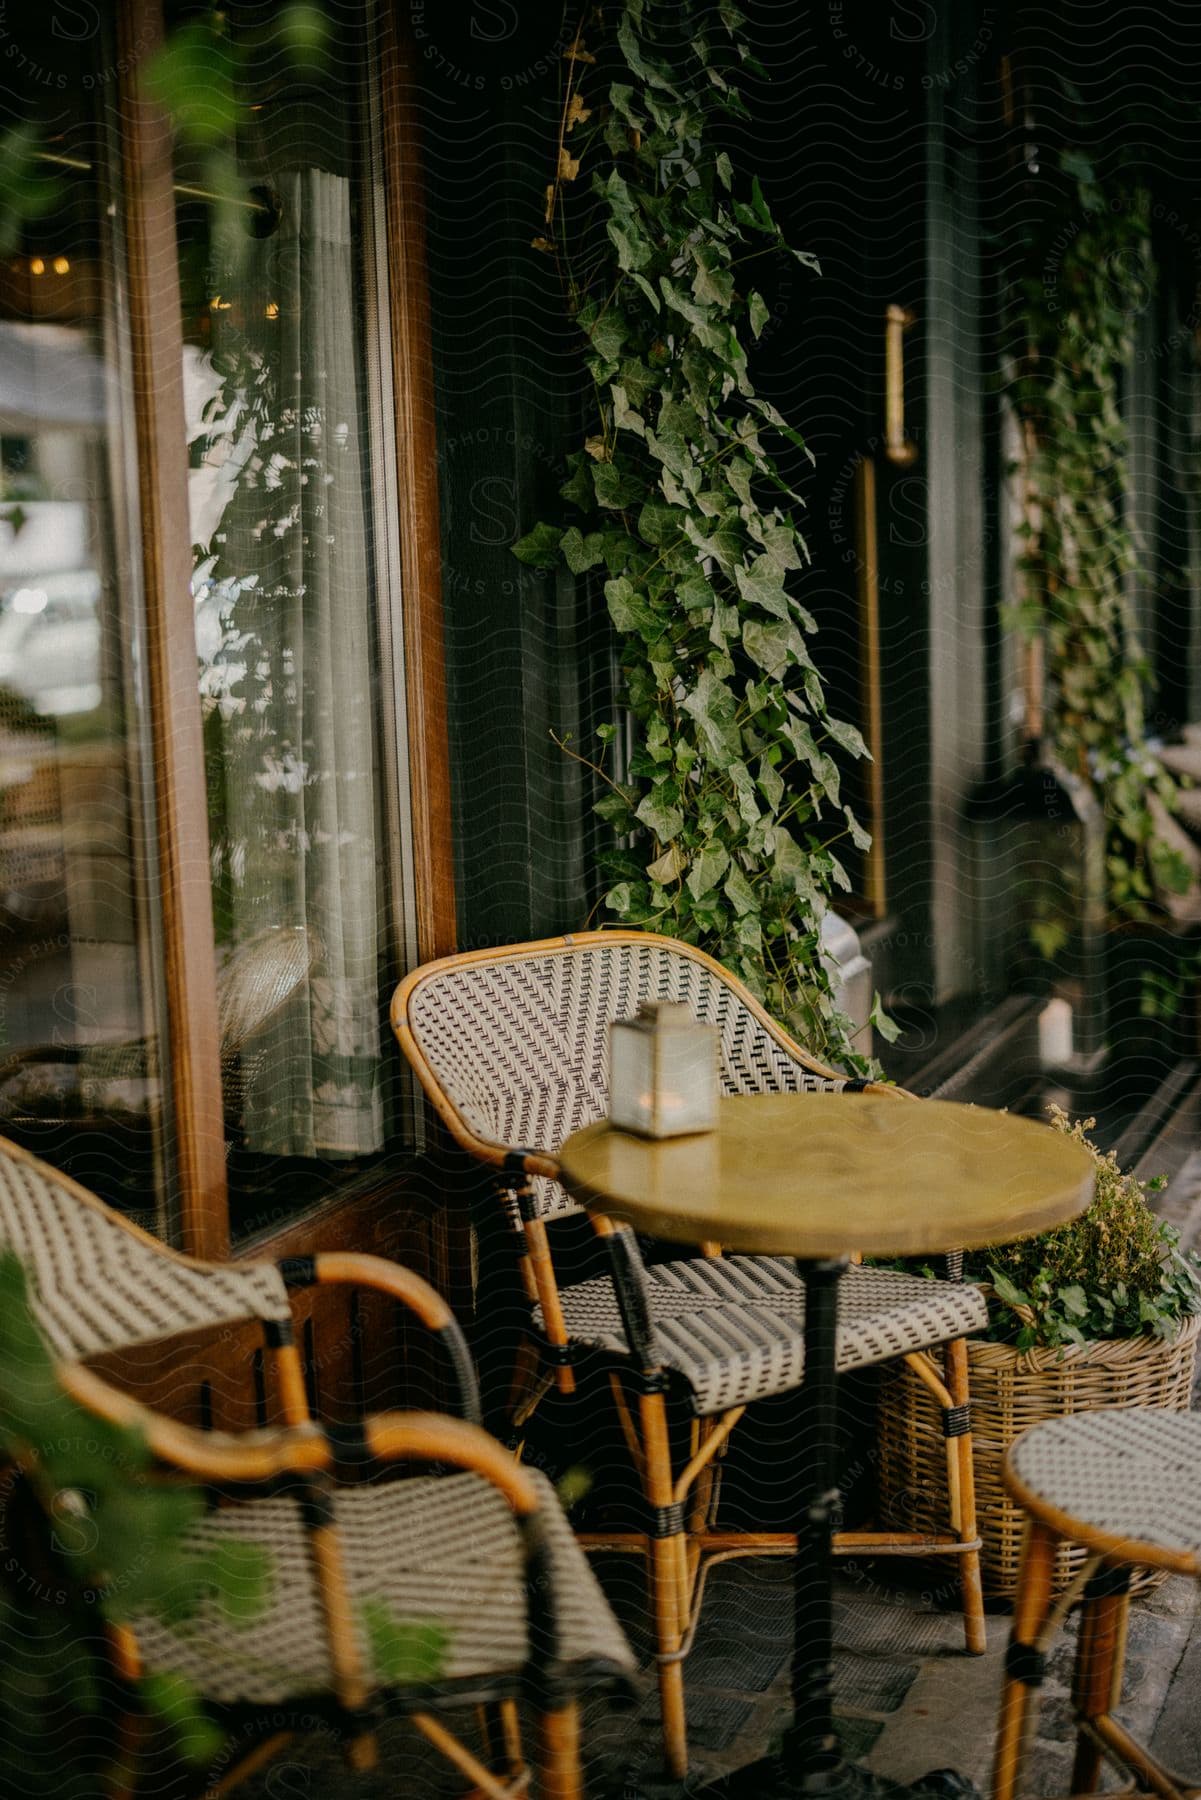 a round coffee table outside a glass window surrounded by fancy wooden chair with a basket on its side growing plant that are climbing the building up